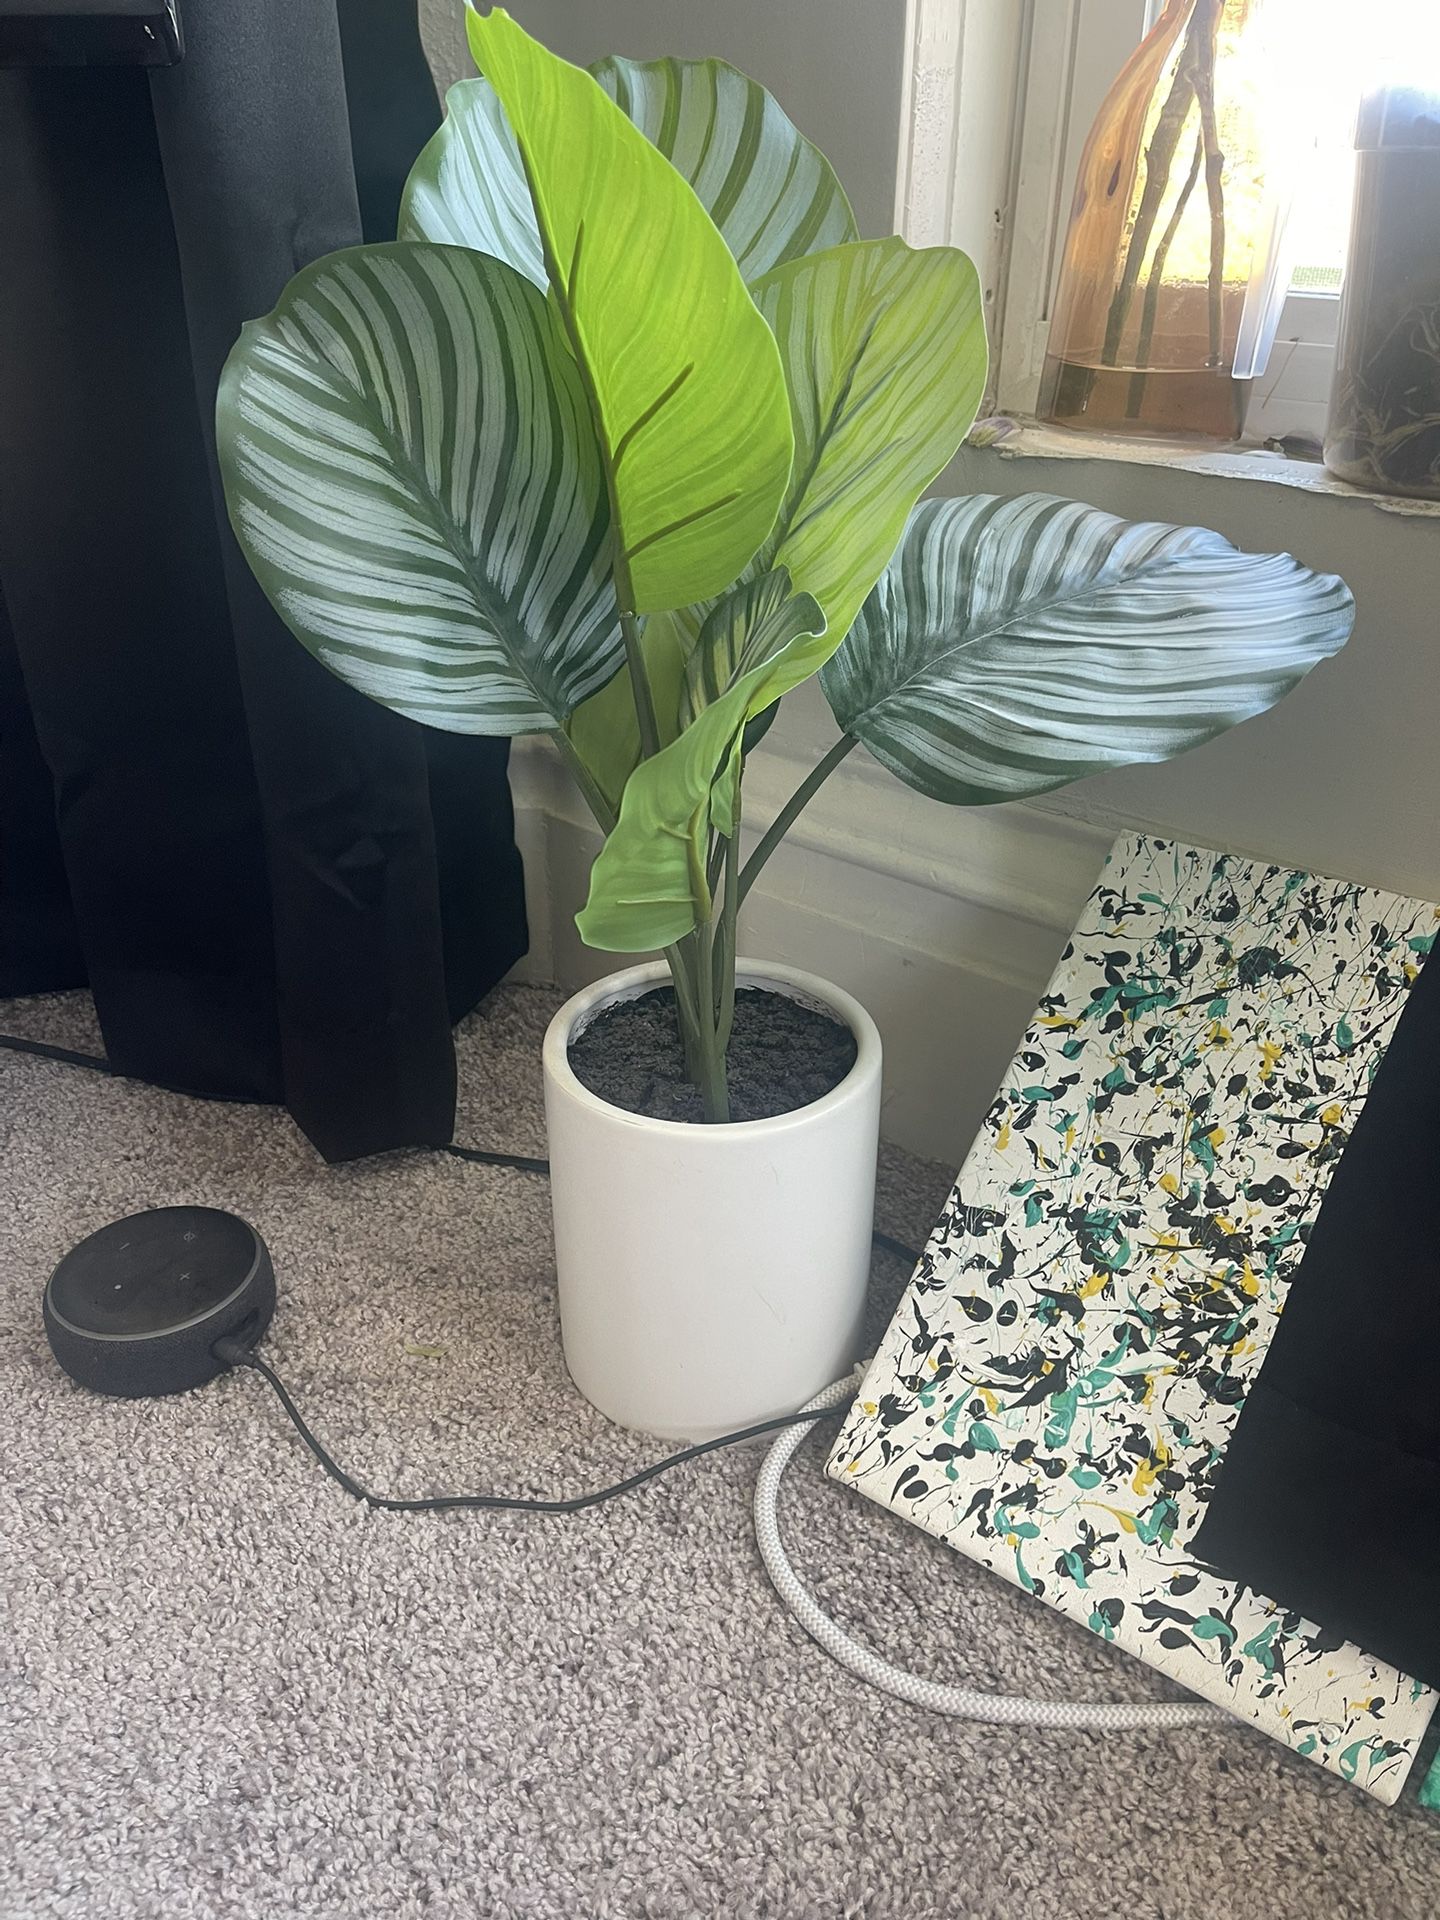 PLANT DECOR FOR $5!!! WAS $20!!